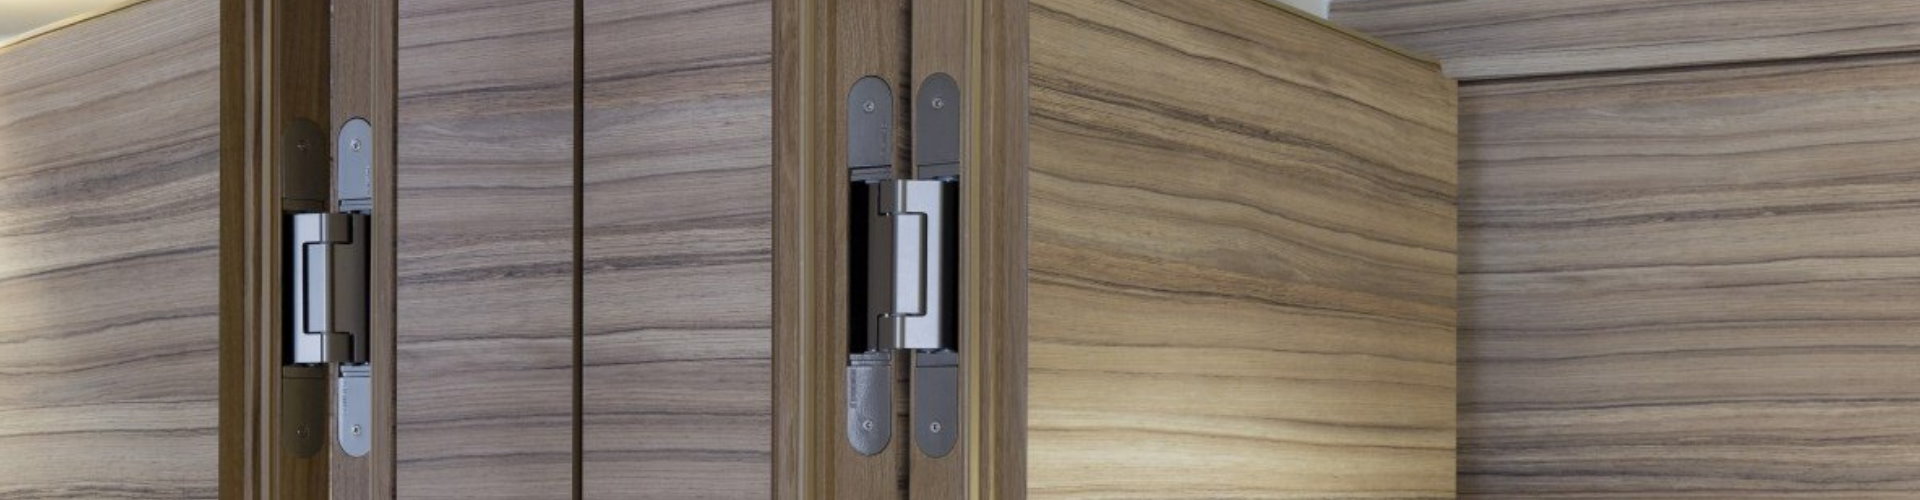 contemporary hardware fittings